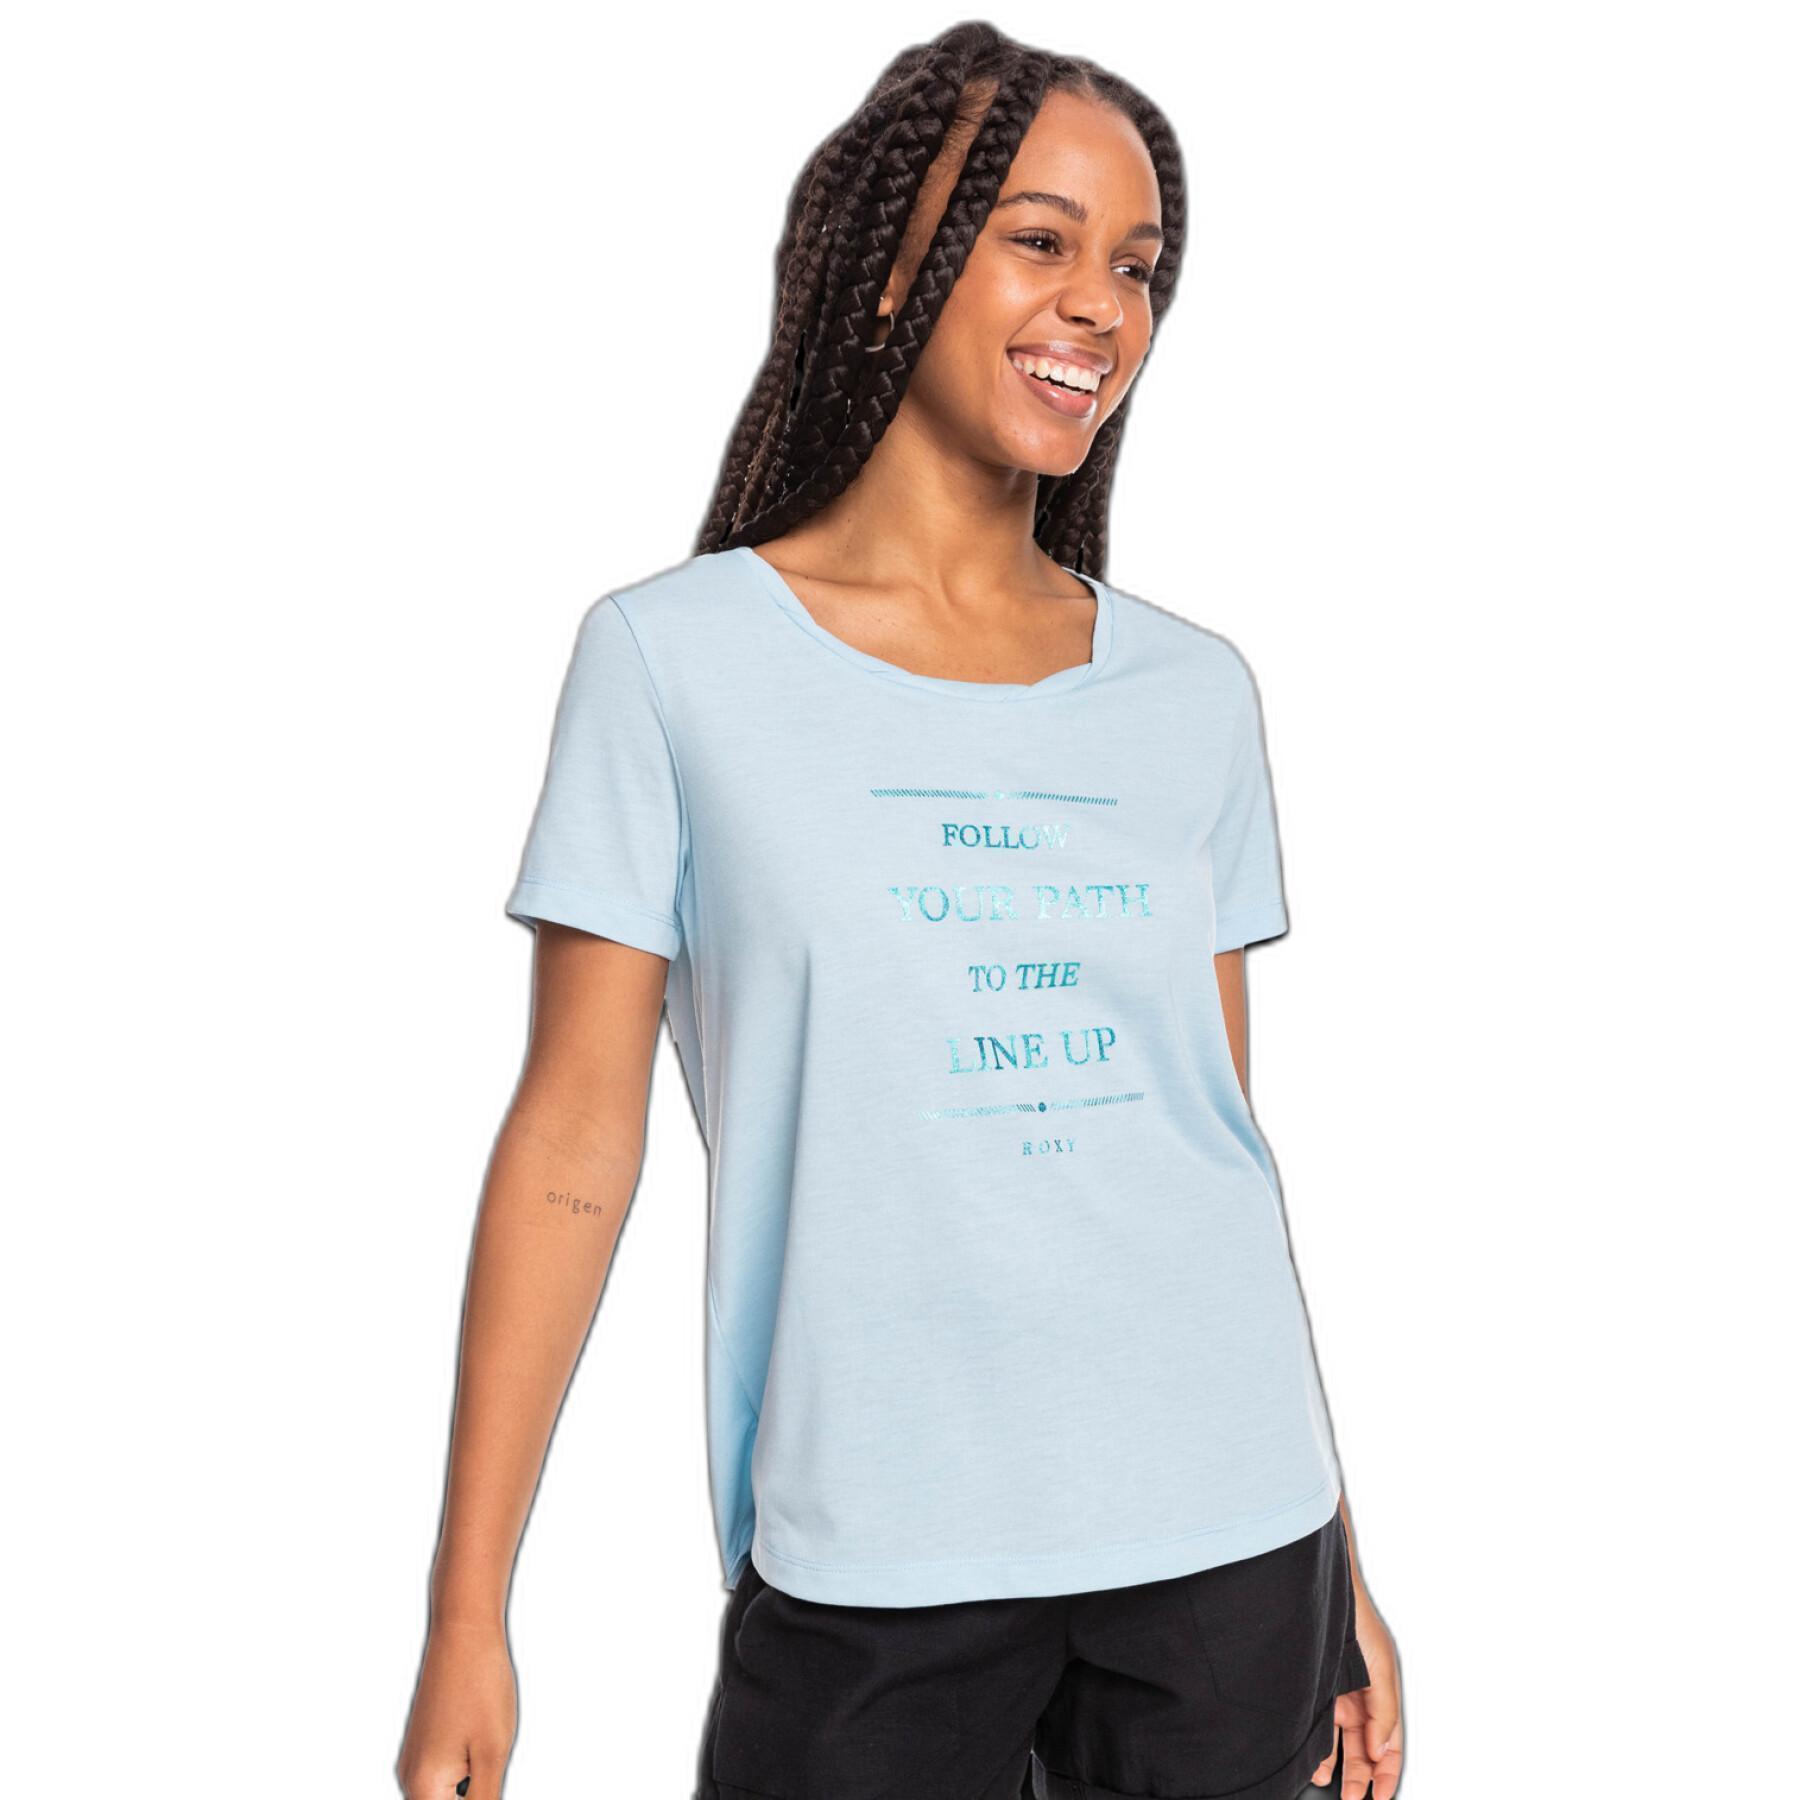 T-shirt femme Roxy Chasing The Swell